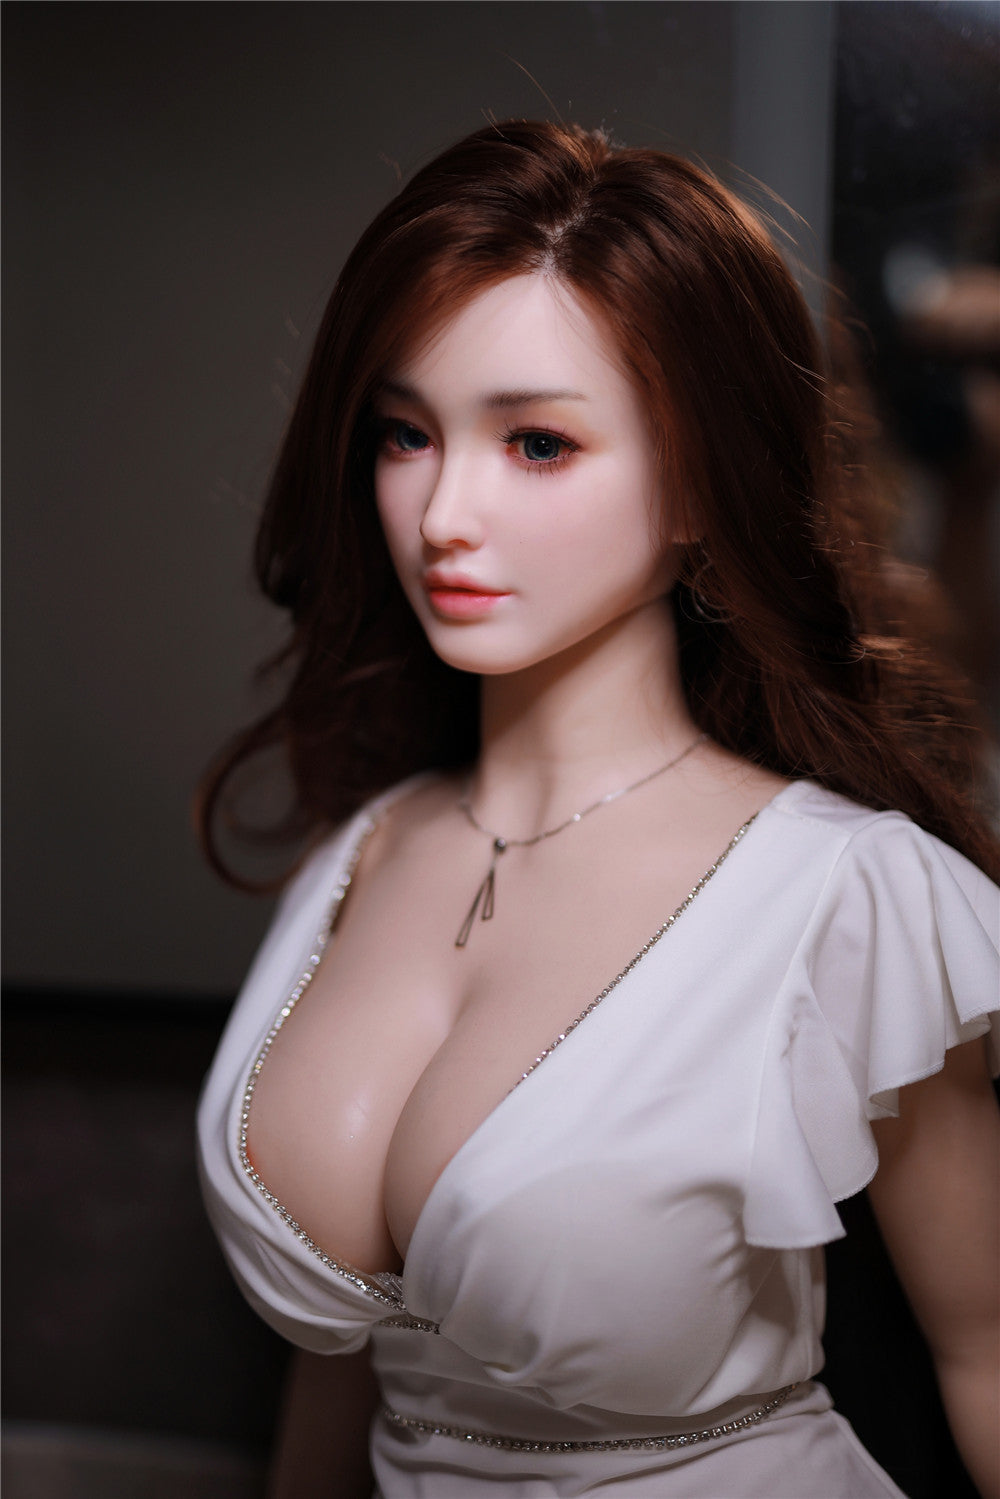 JY Doll 163 cm Silicone - Amlly | Buy Sex Dolls at DOLLS ACTUALLY